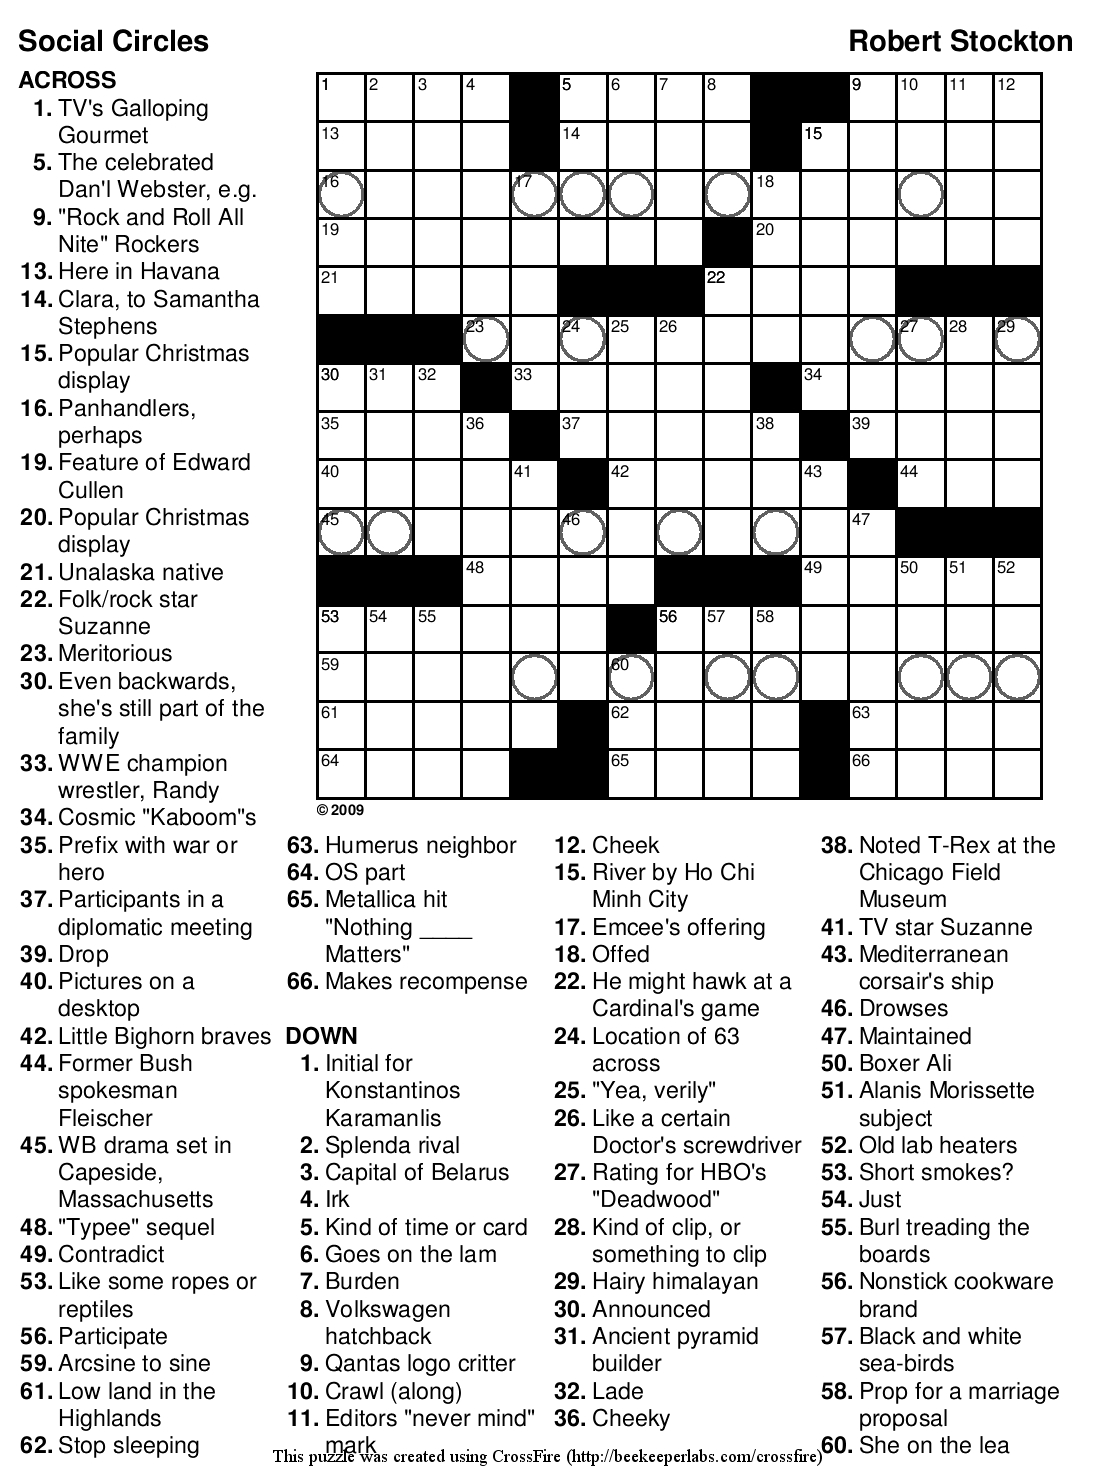 Crossword Puzzles Printable - Yahoo Image Search Results | Crossword - Free Daily Printable Crossword Puzzles